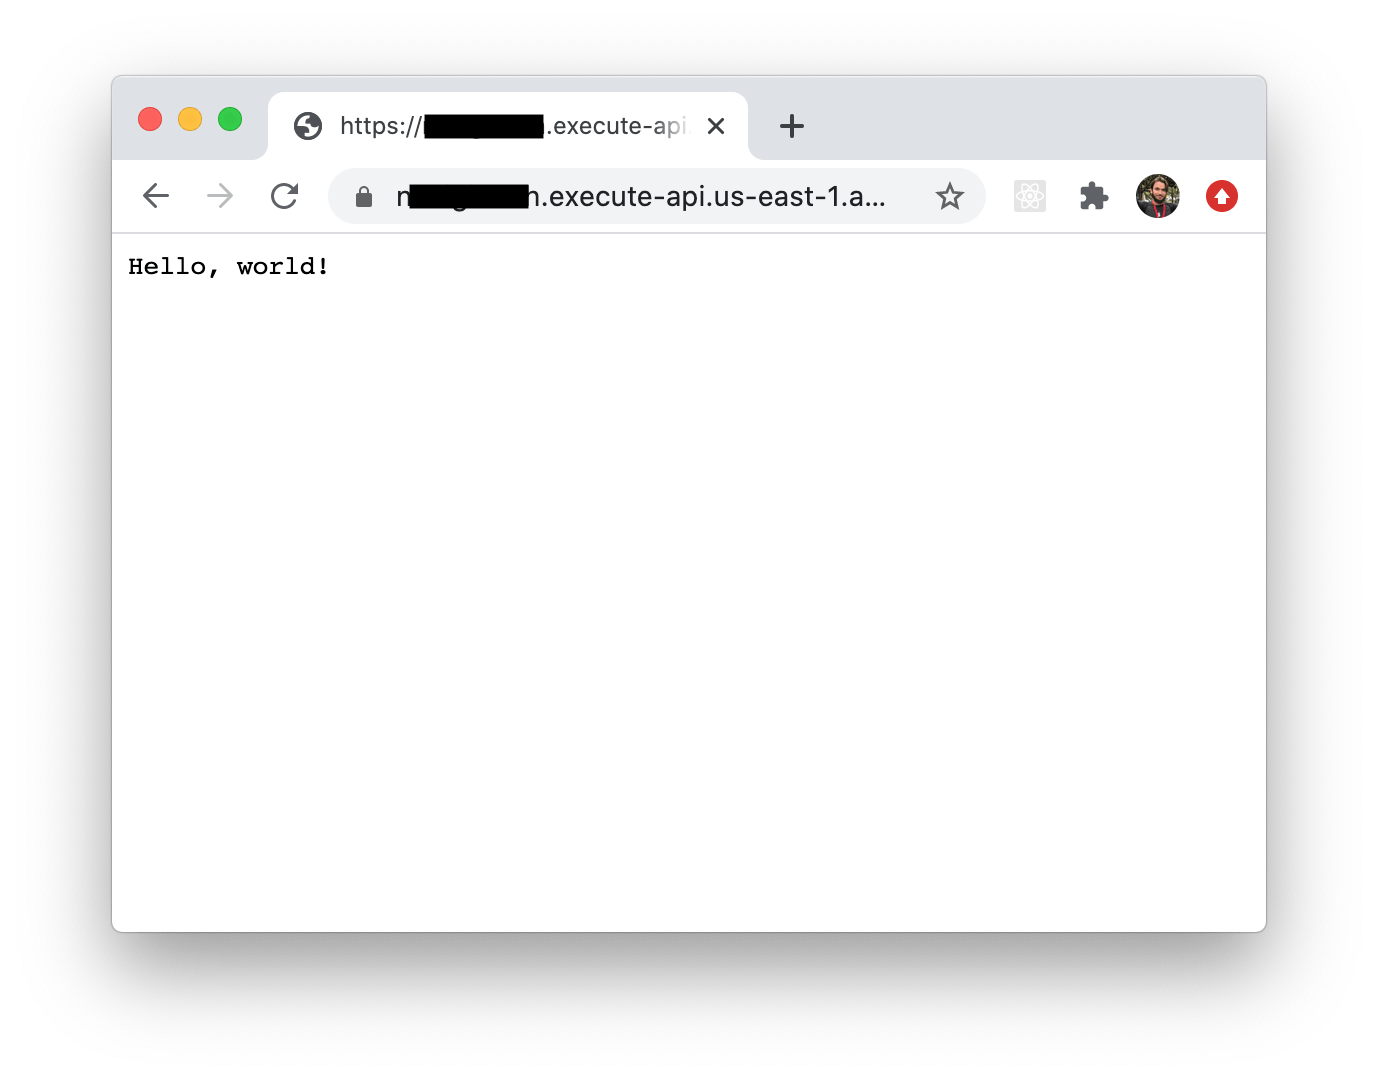 Image shows a browser on an AWS Lambda URL showing the words "Hello, world!" output from the swift code